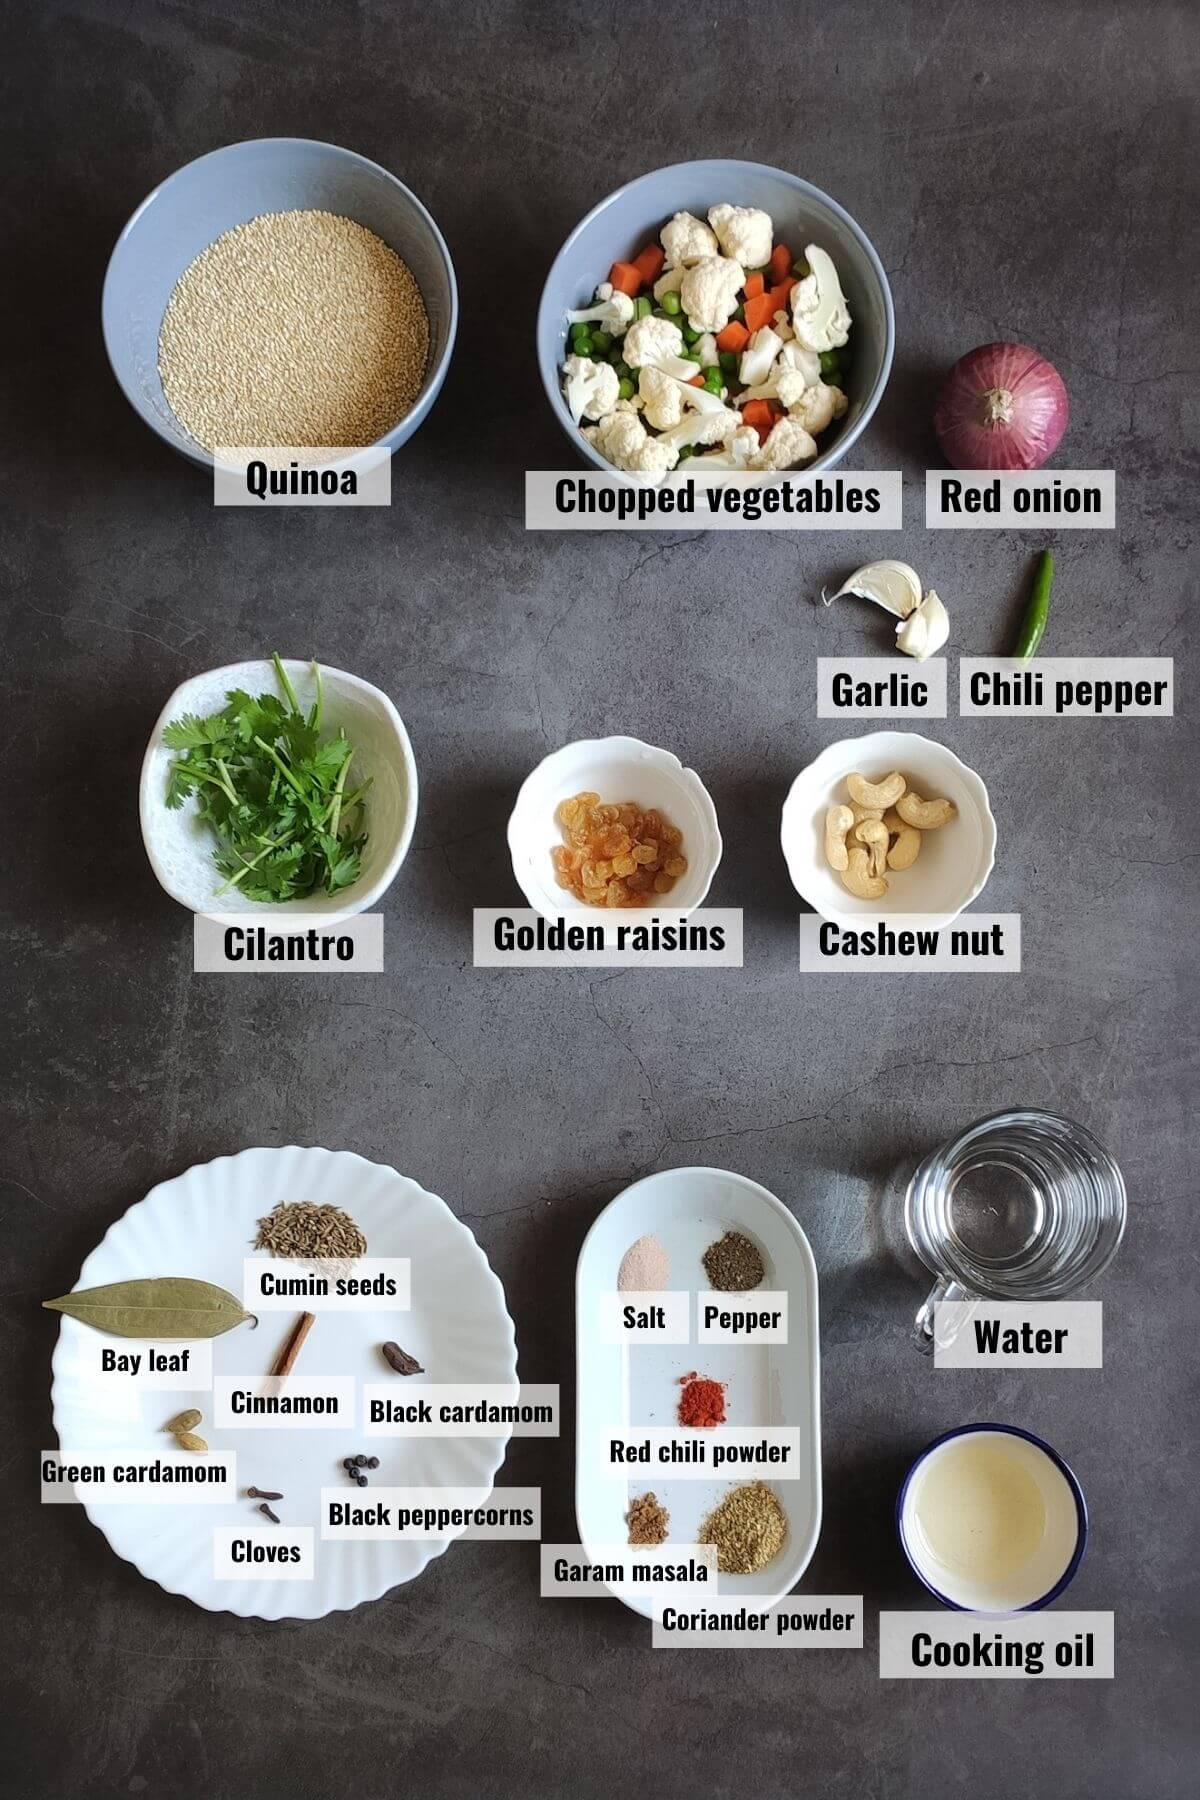 Ingredients required to make vegetable quinoa pulao